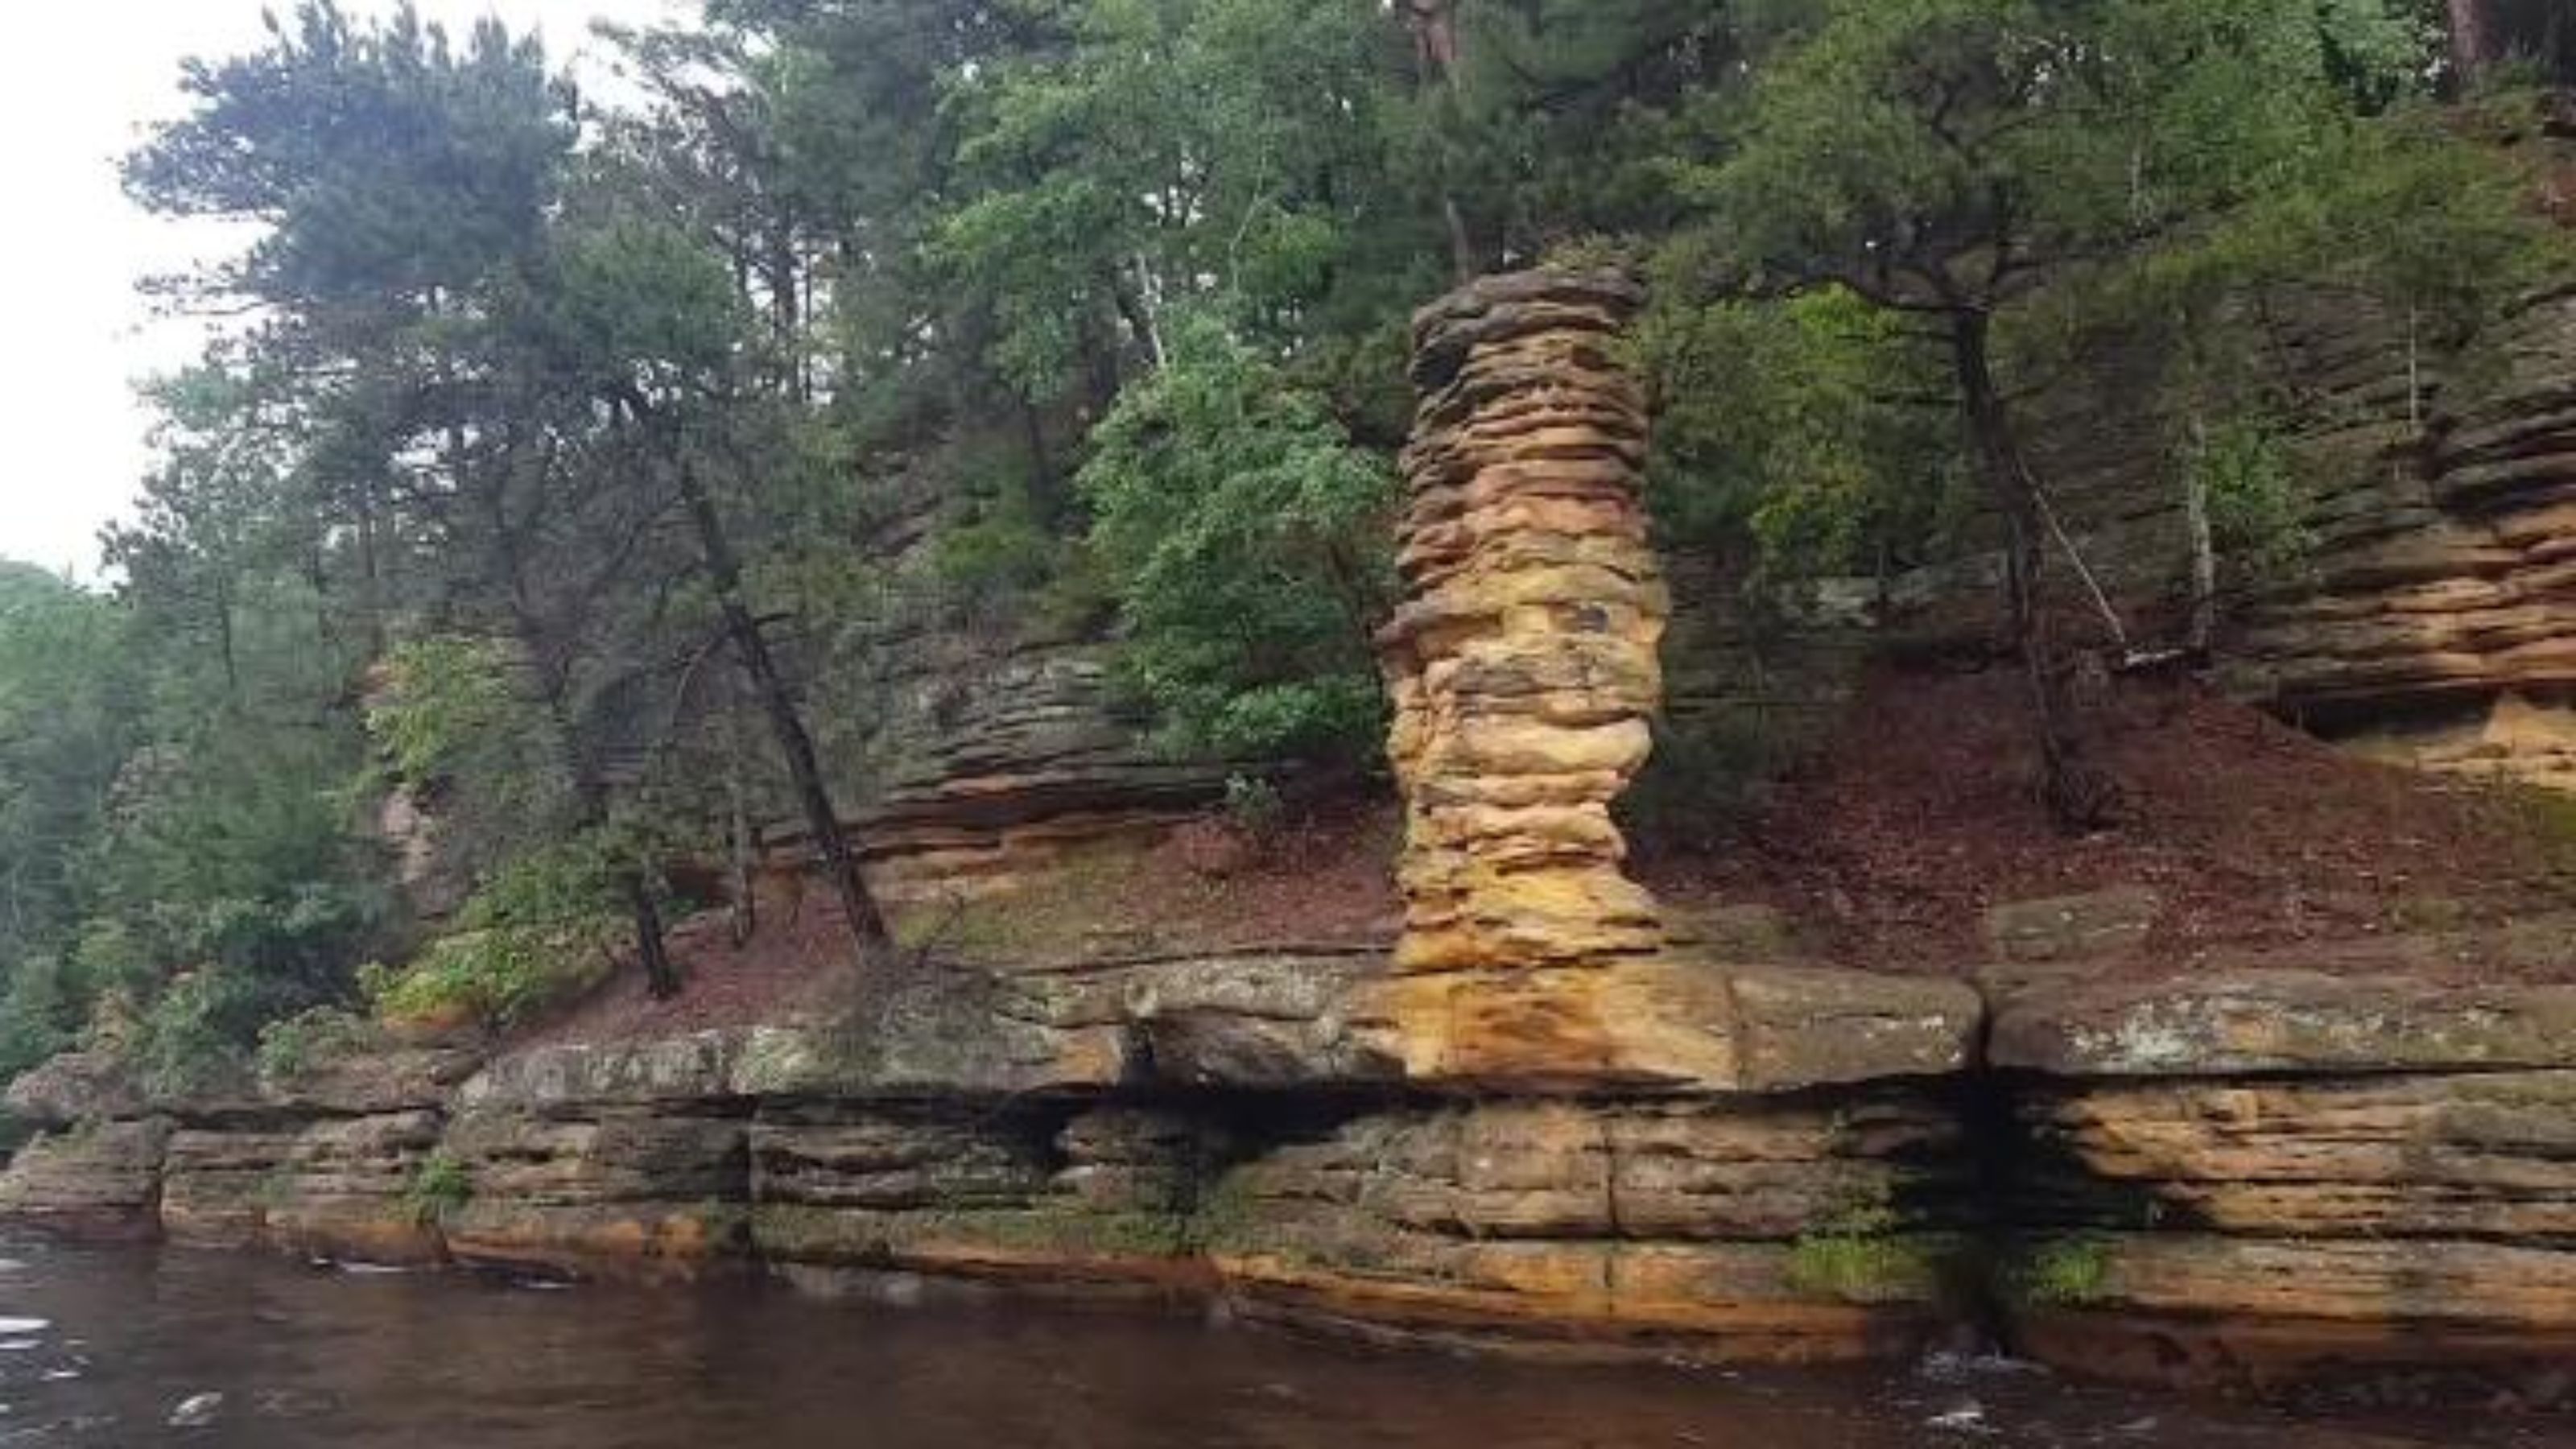 Video: The Dells of the Wisconsin River are a natural gem